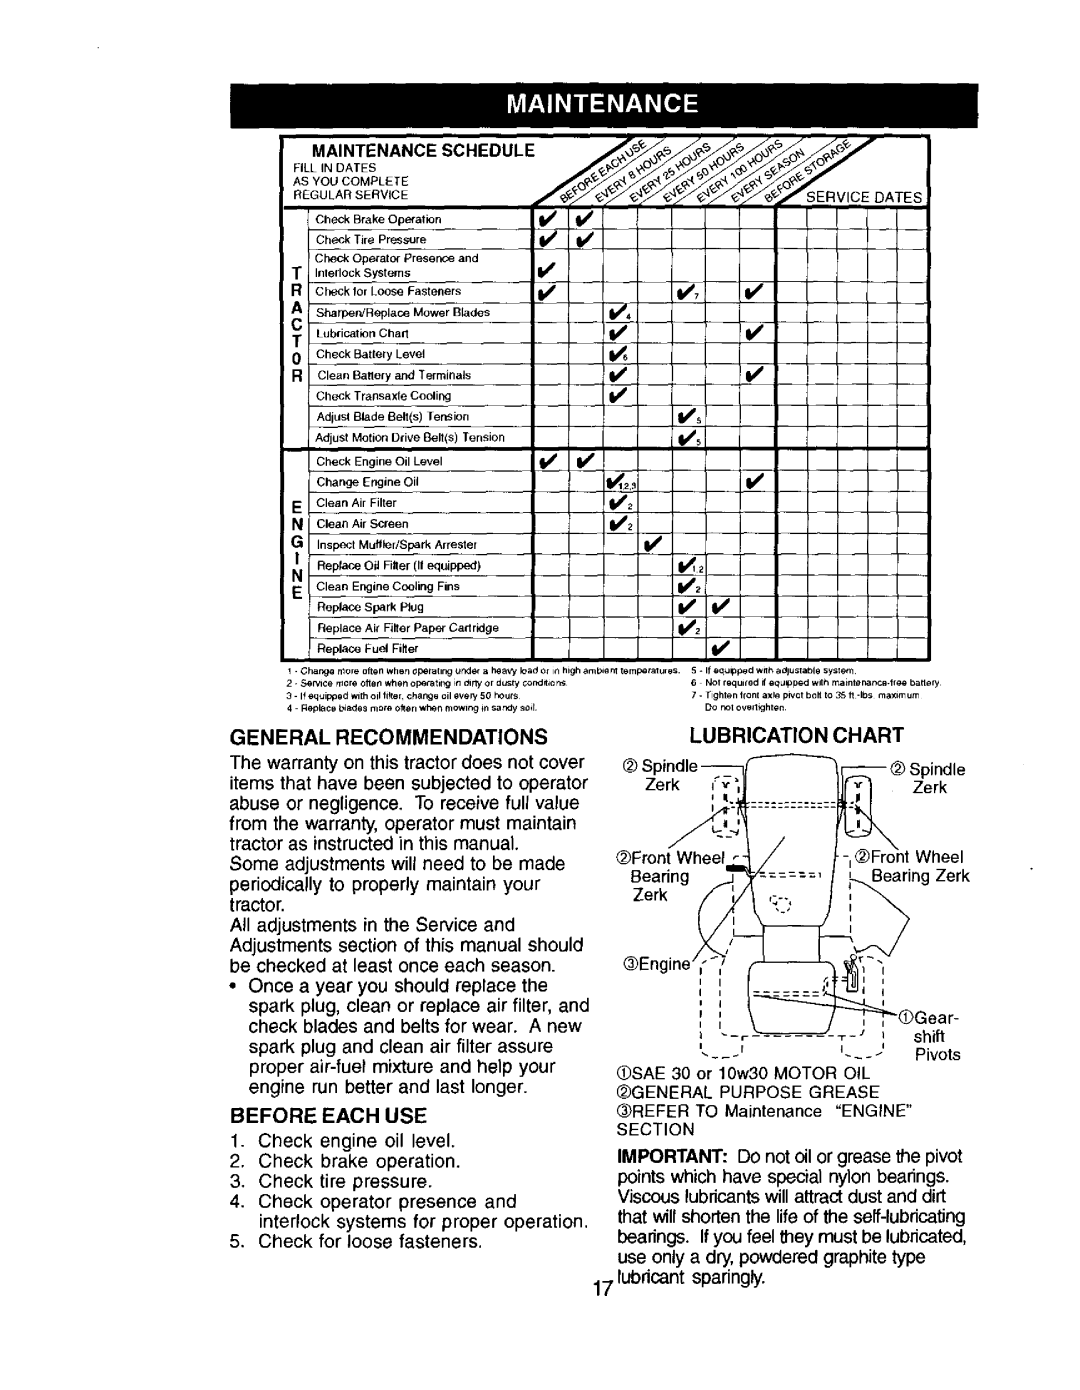 Craftsman 917.272057 owner manual General, Recommendations, Lubrication, Chart, Before Each Use, tractor, Purpose 